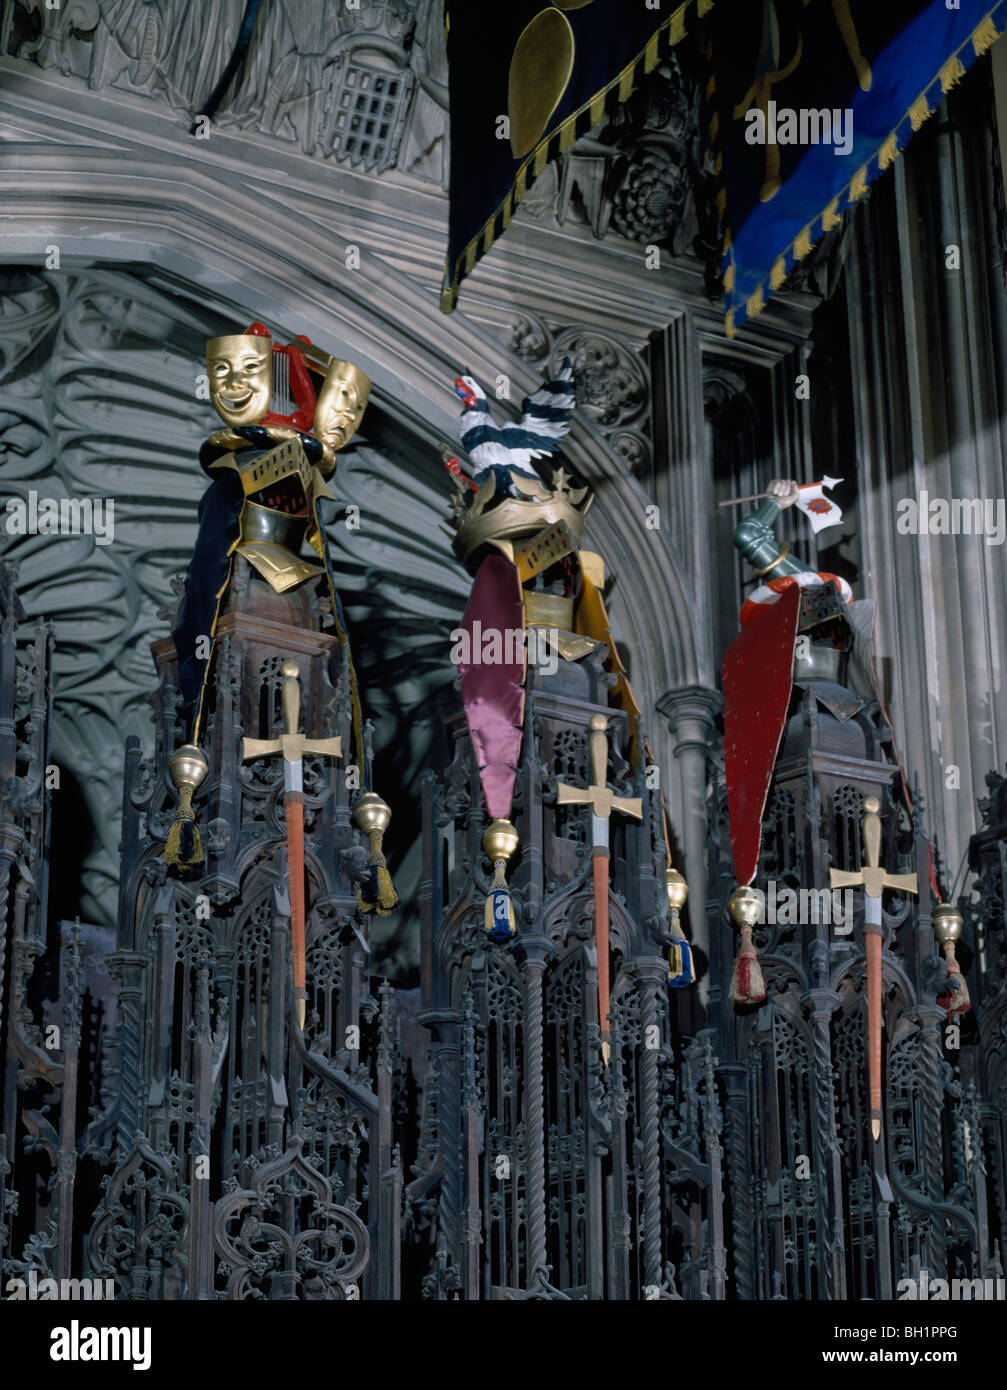 Trophies & arms of the Most Honourable Order of the Bath on canopies above stalls in the Henry VII Chapel Westminster Abbey Stock Photo